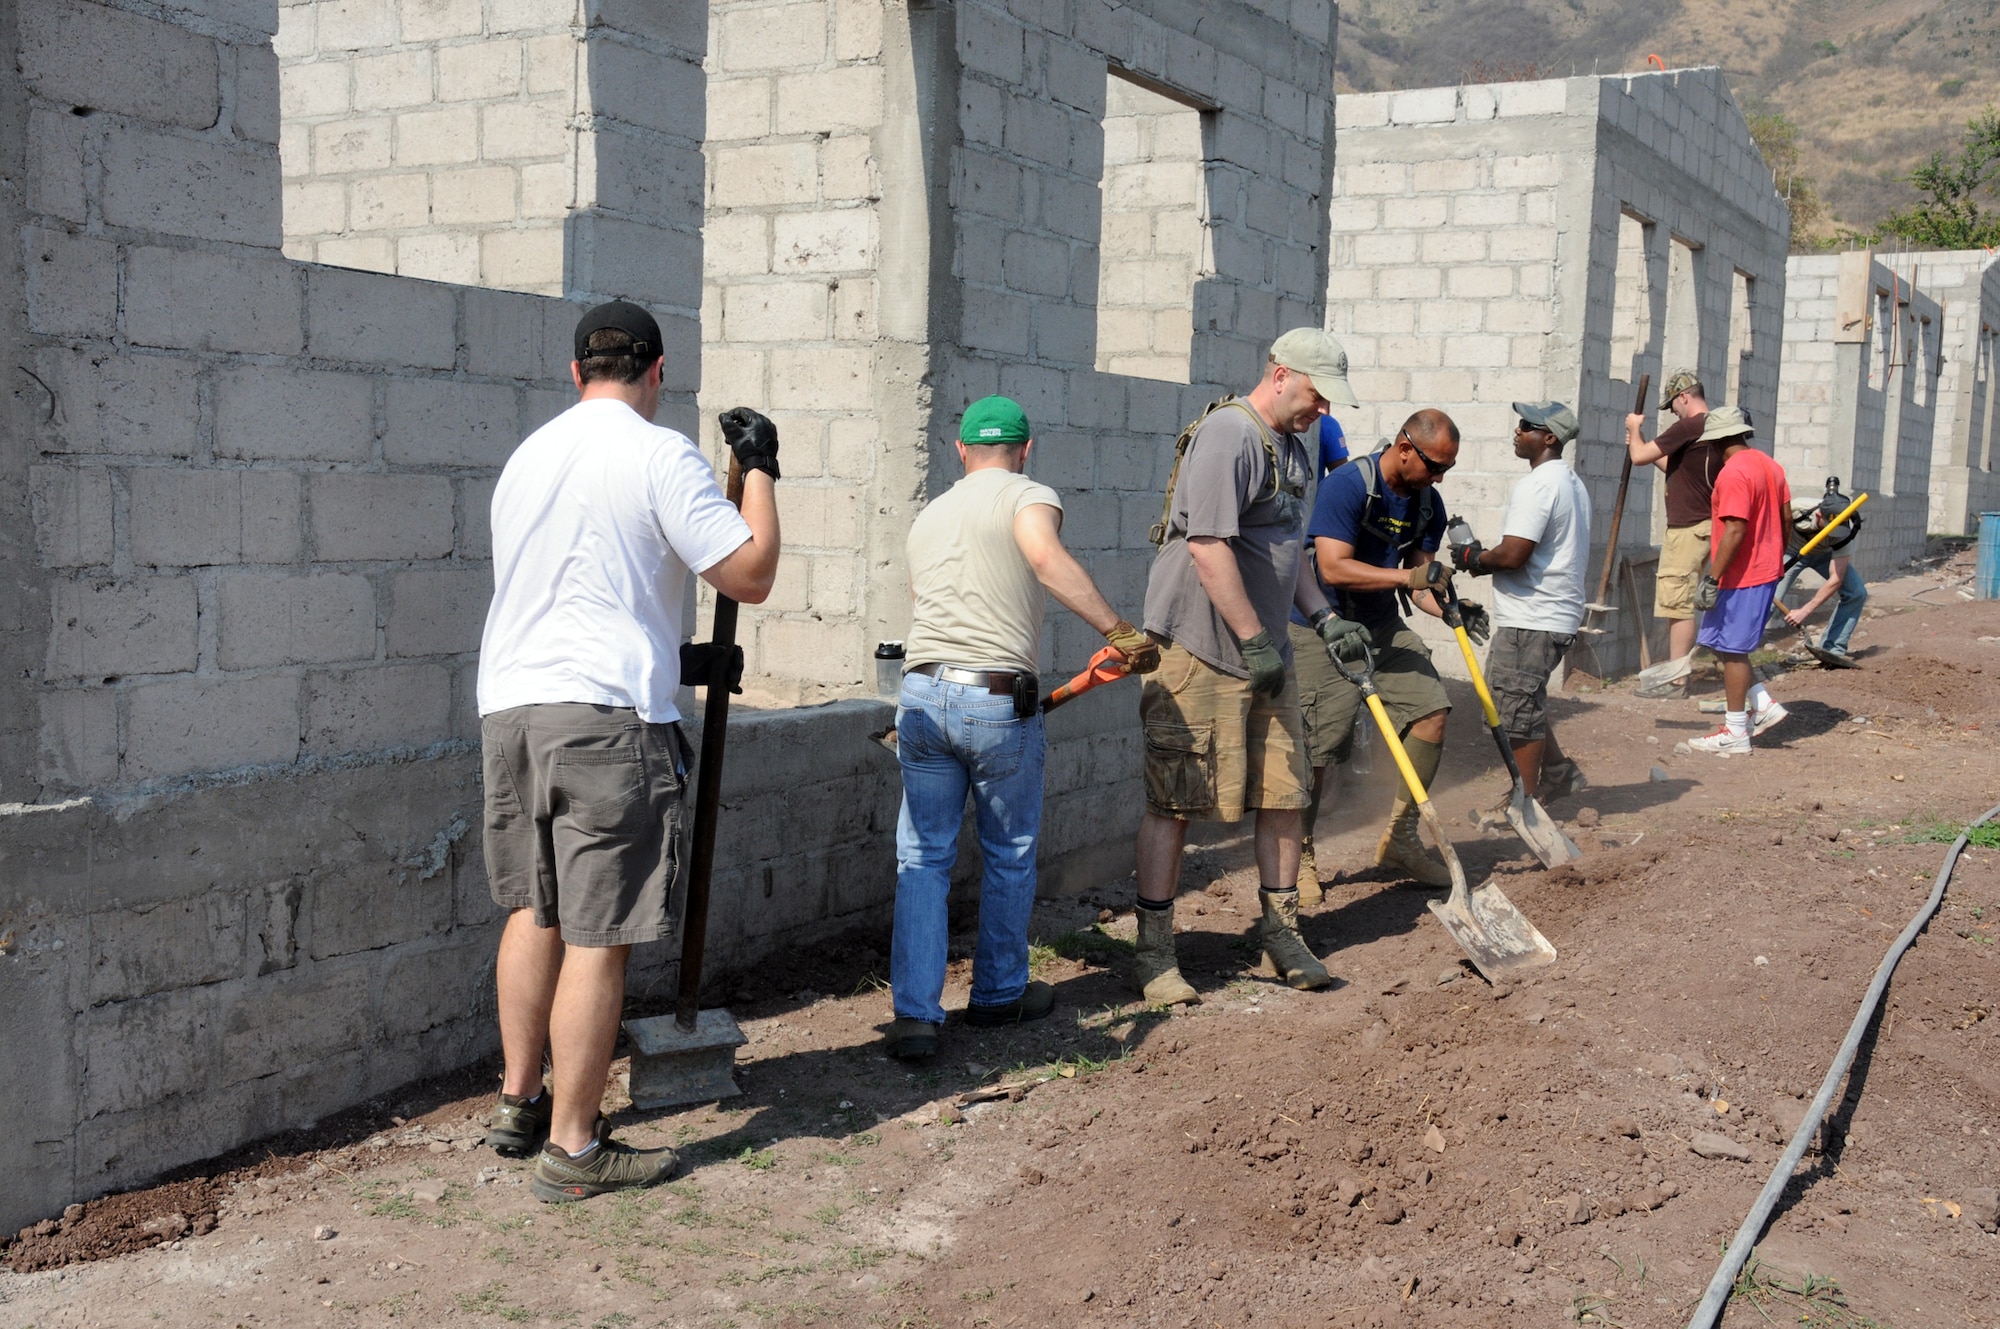 Twenty-one Joint Task Force-Bravo service members filled trenches, leveled ground and shoveled dirt at the Ajuterique Housing Project helping several Honduran families get closer to moving into their new homes April 5, 2014.  In conjunction with the Honduras Habit for Humanity, Siguatepeque region, the Municipality of Ajuterique and the Civil-Military Operations office at JTF-Bravo, these service members volunteered their labor to assist in the building of homes in the Ajuterique community.  The two-phased project includes building 38 two-bedroom, one-bath homes for low-income Hondurans who can afford to construct a home but doesn't own the land to build on. (Photo by U. S. Air National Guard Capt. Steven Stubbs)